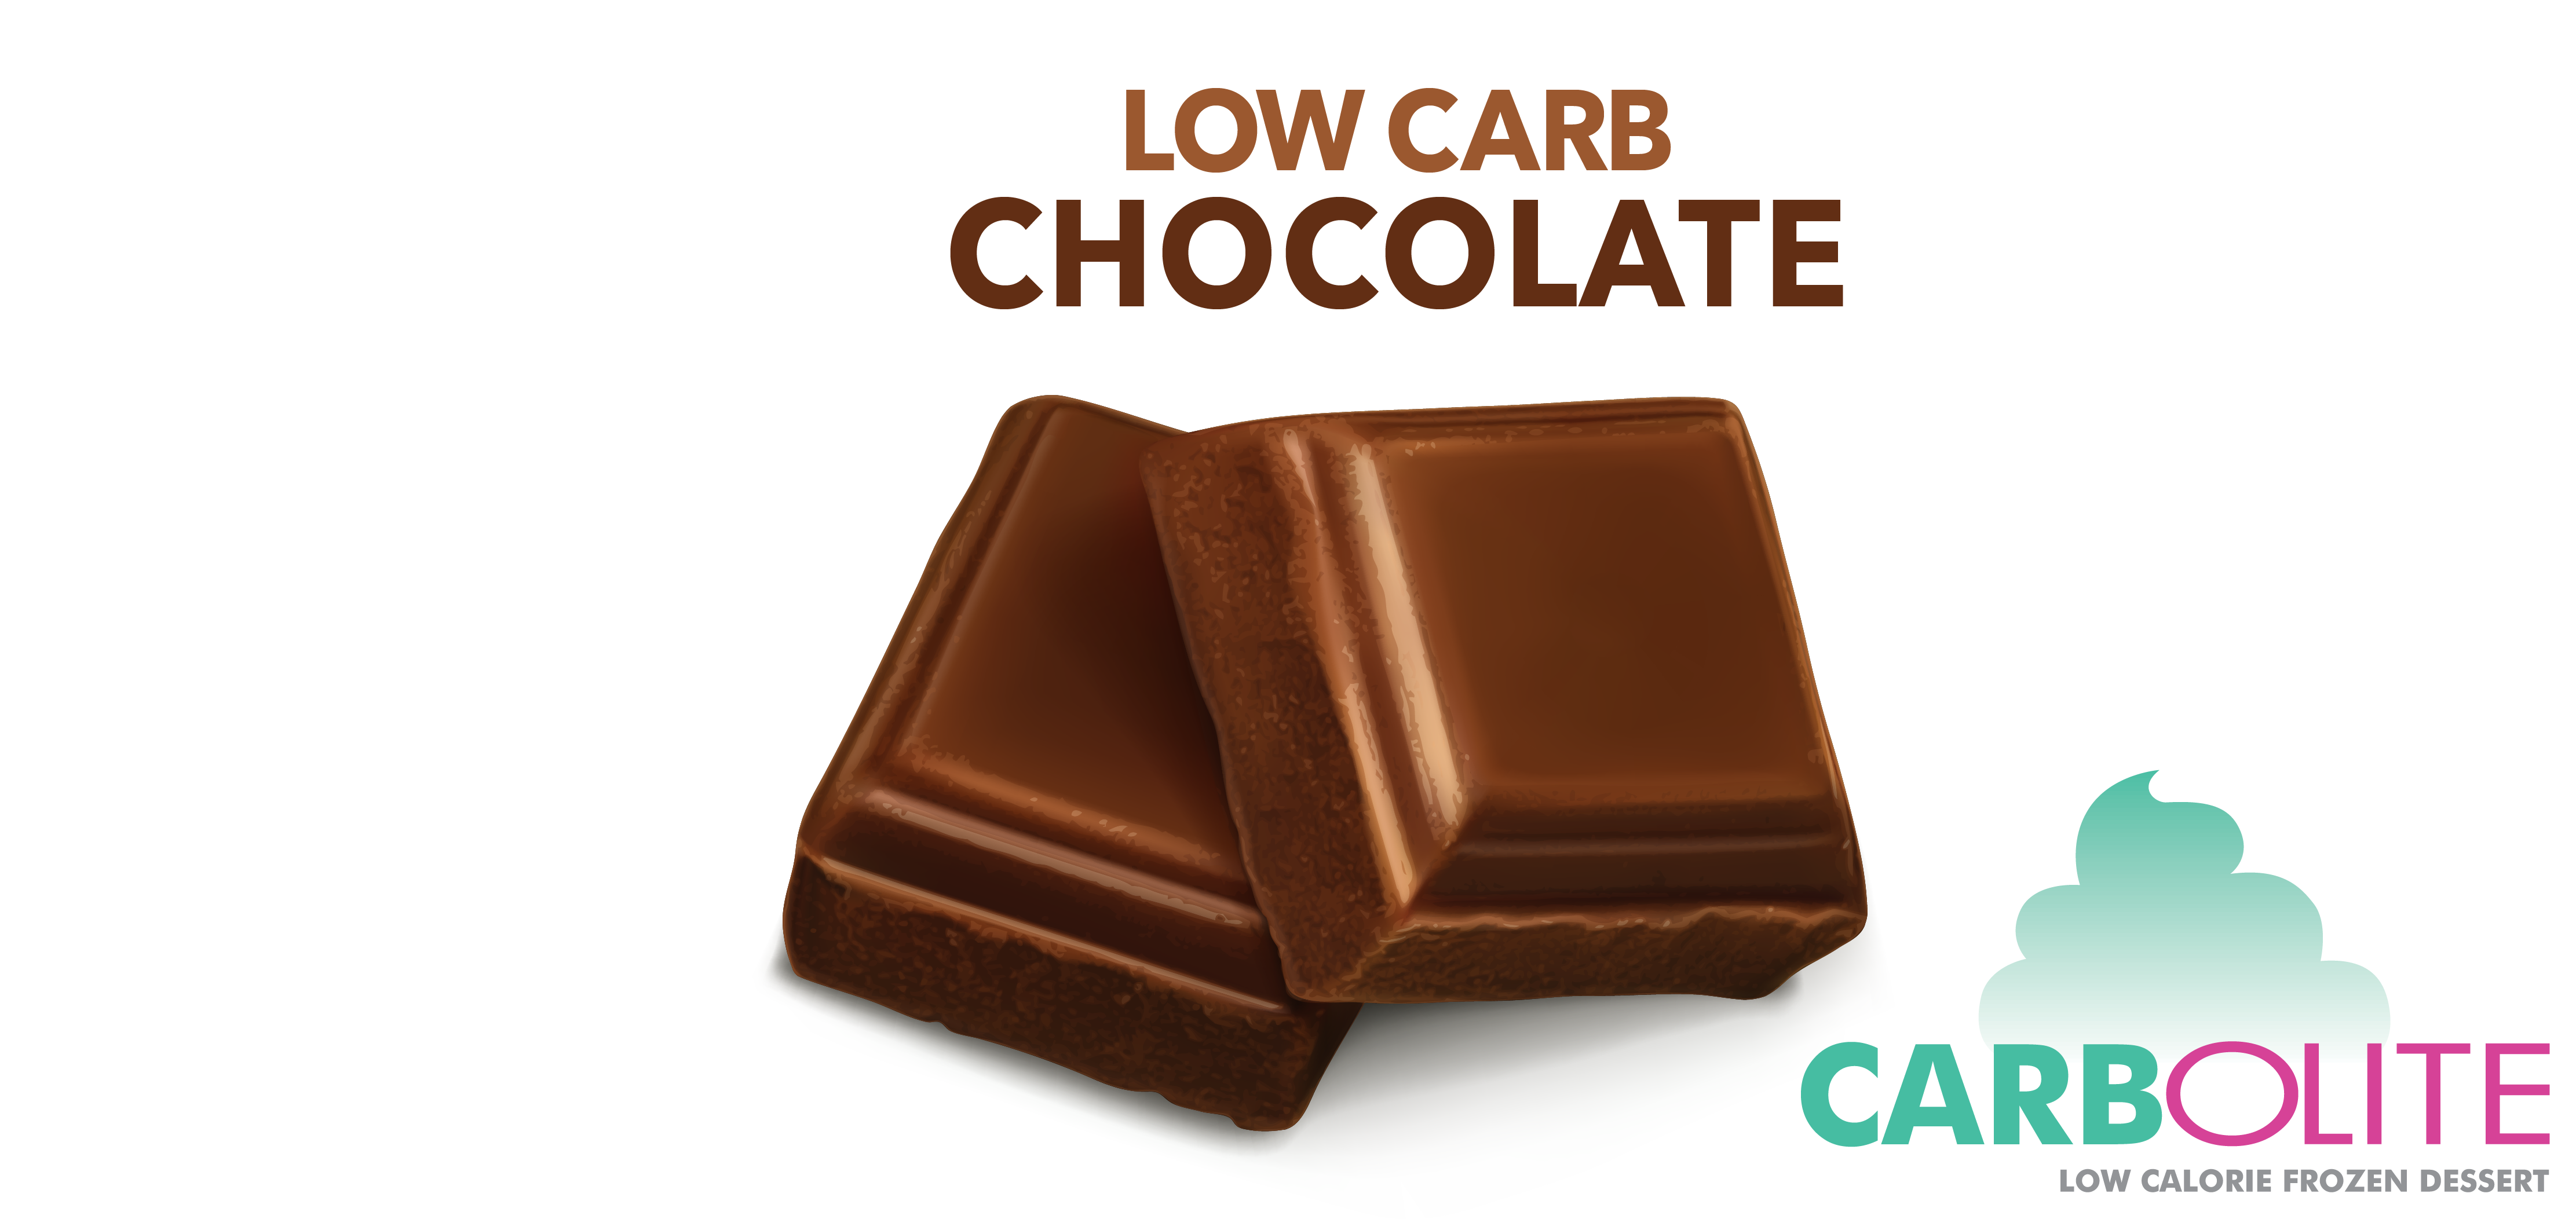 carbolite low carb no sugar added chocolate label image